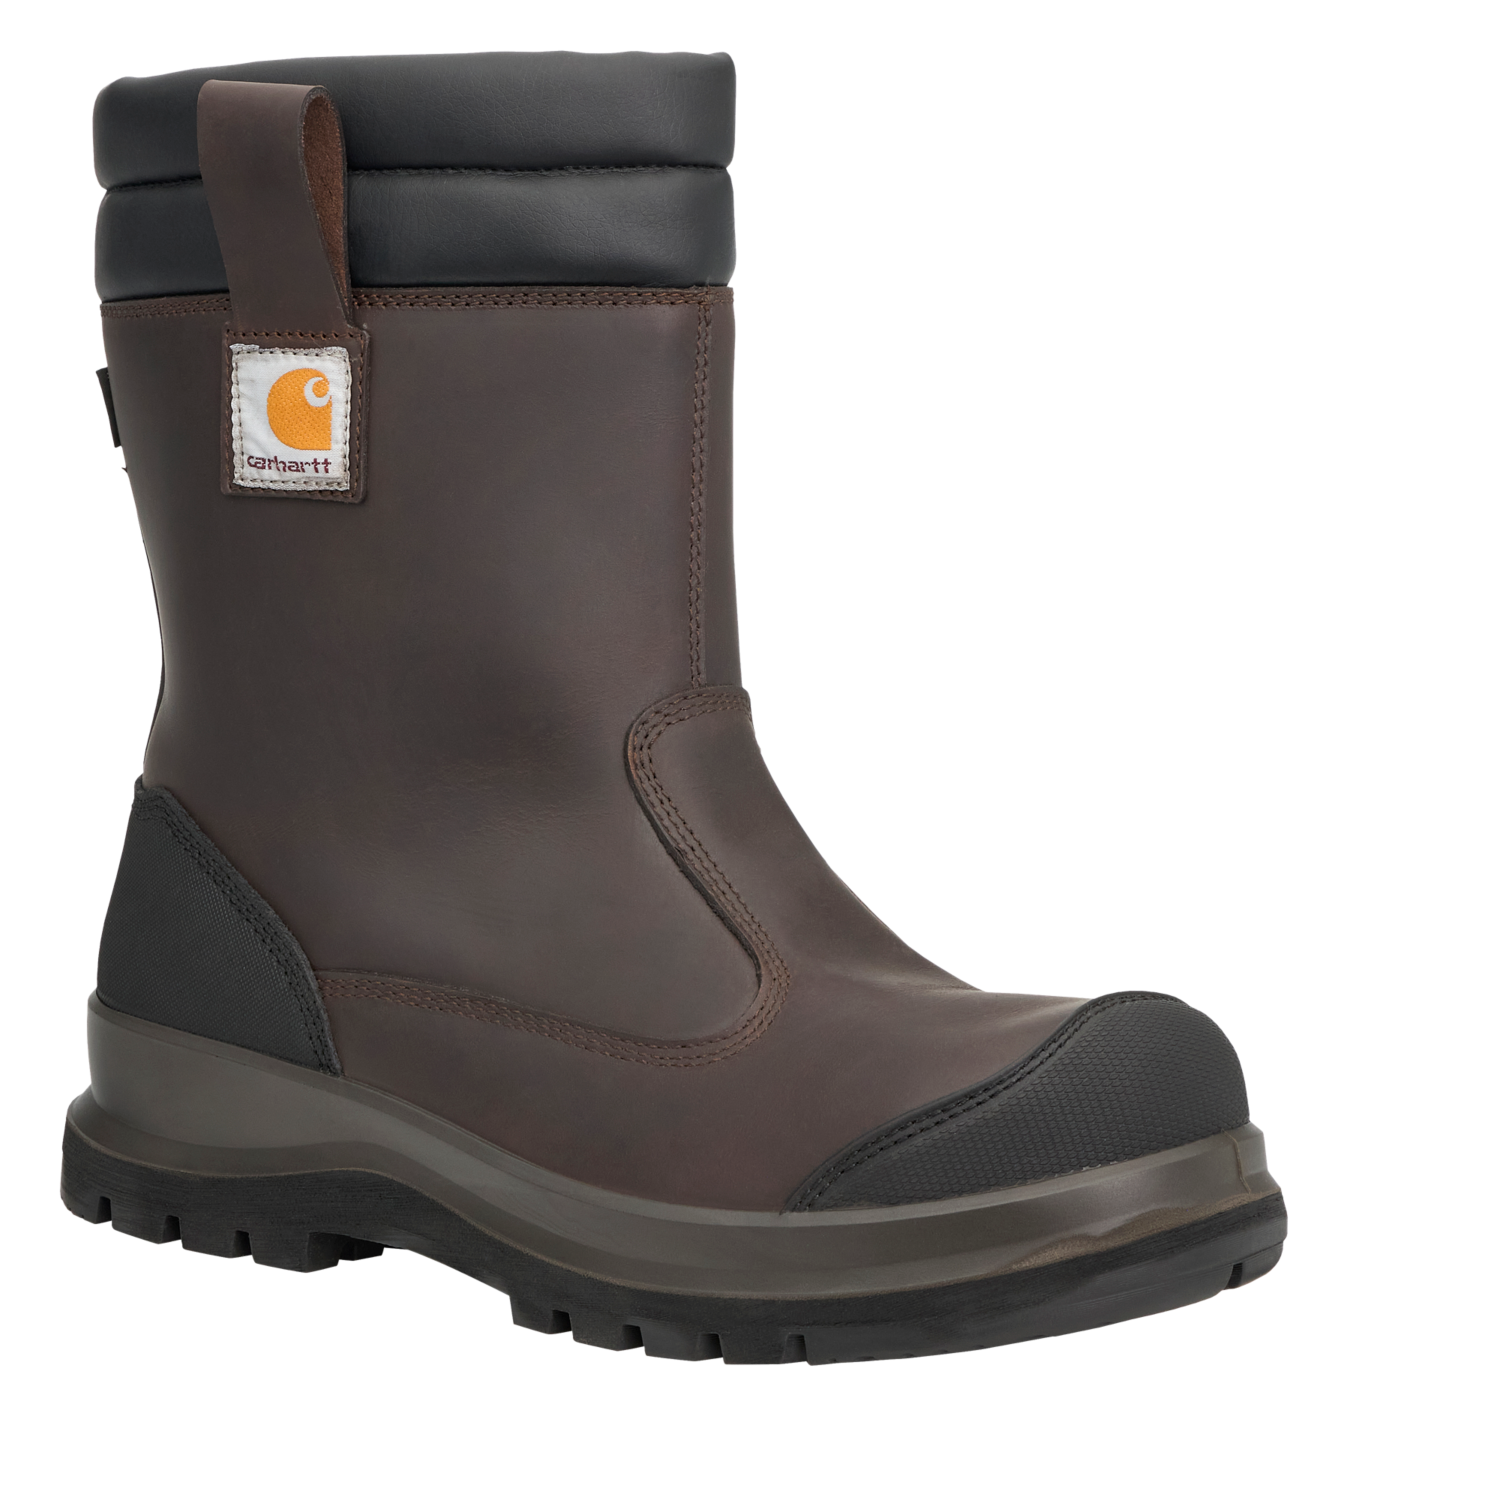 CARTER_WATERPROOF_S3_SAFETY_BOOT_TcO0Tus4Qq